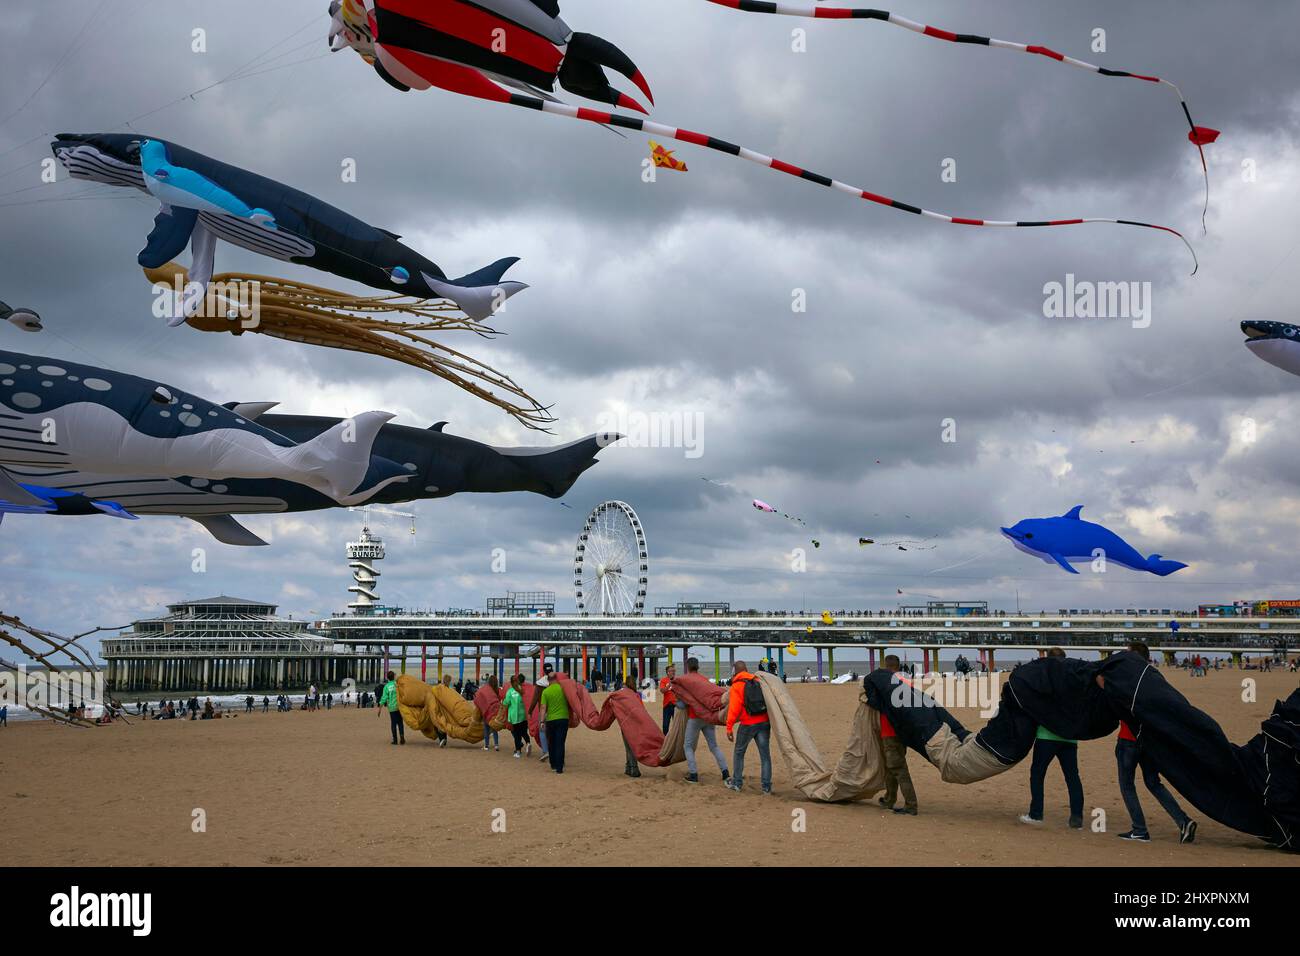 Participants of the Lekker Windje team transport the Megabyte kite, the largest kite in the world with a total of 2000 square meters of fabric Stock Photo